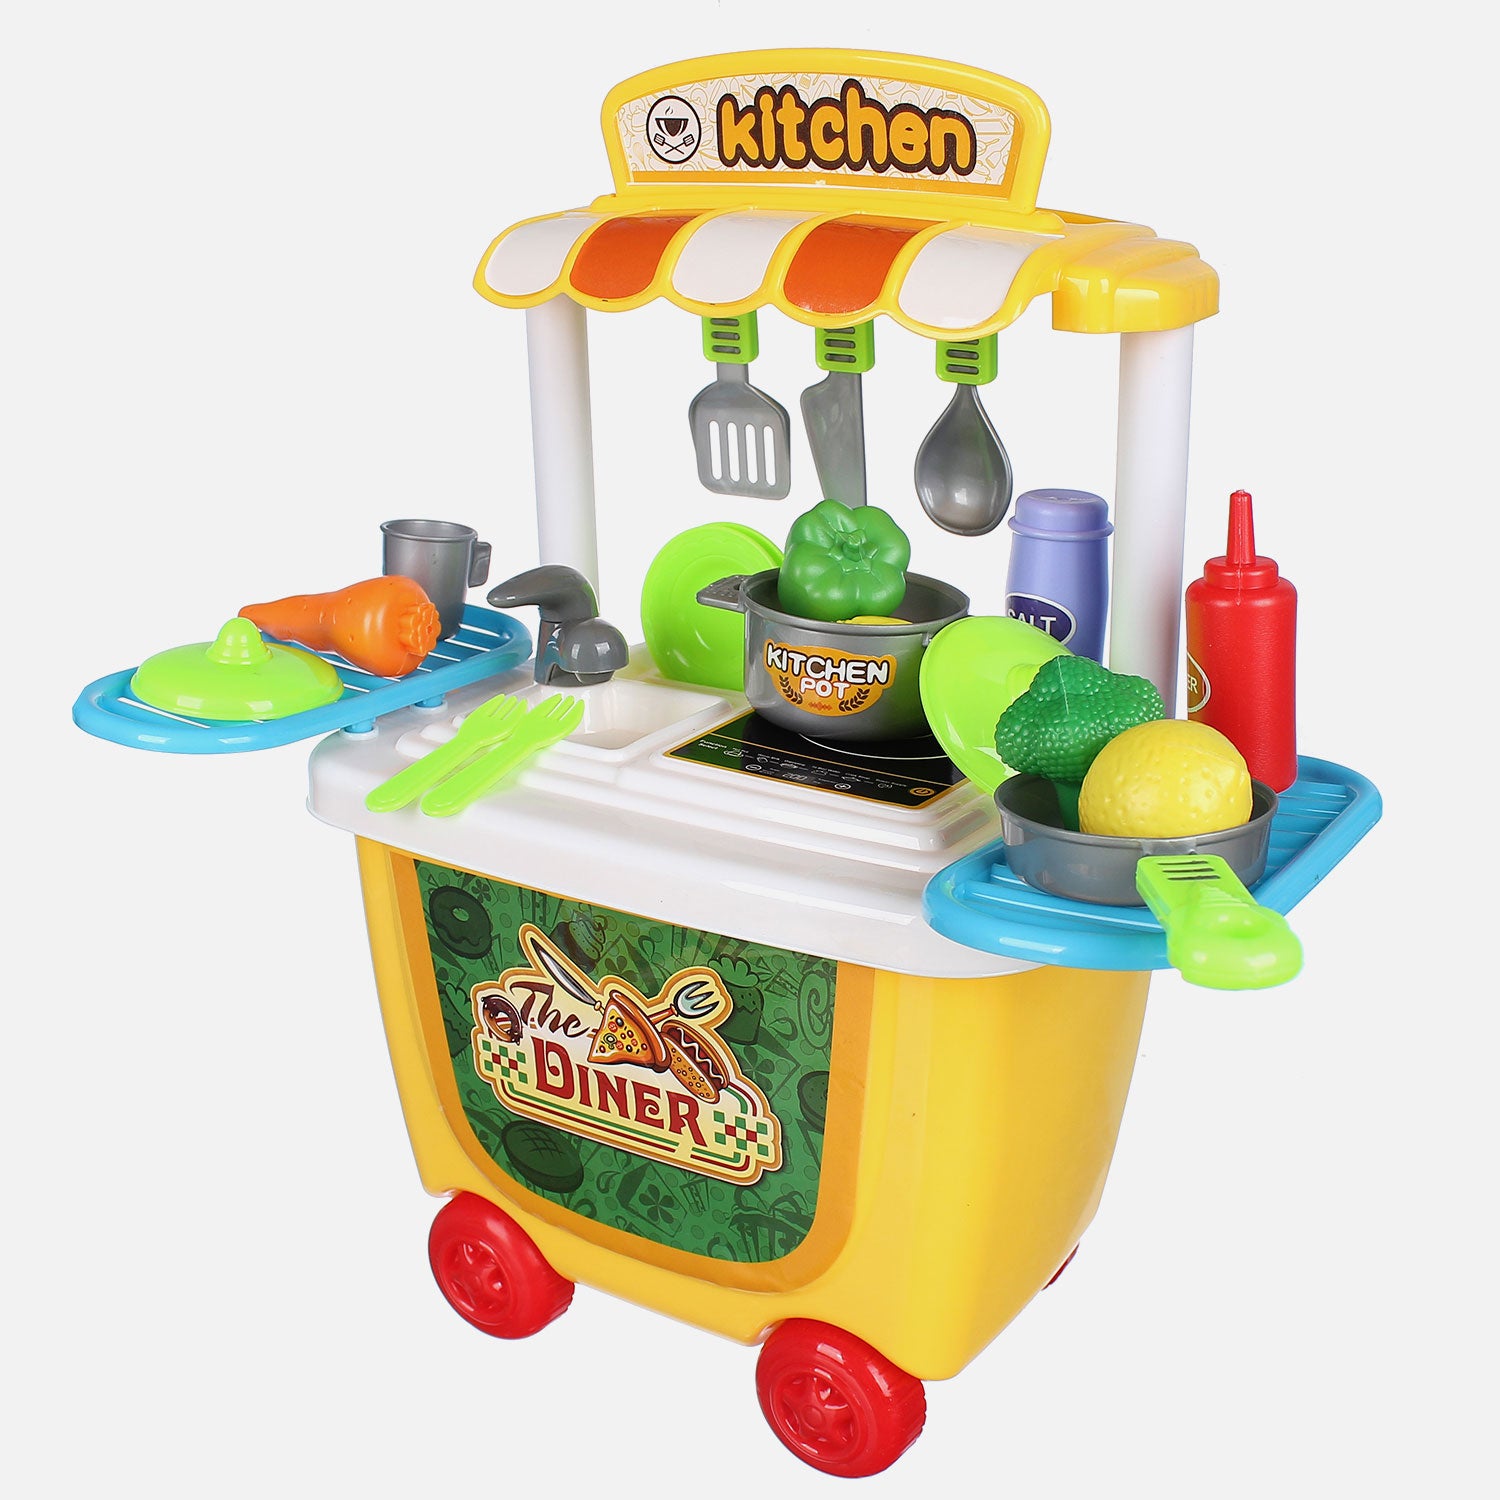 Kitchen toys for babies